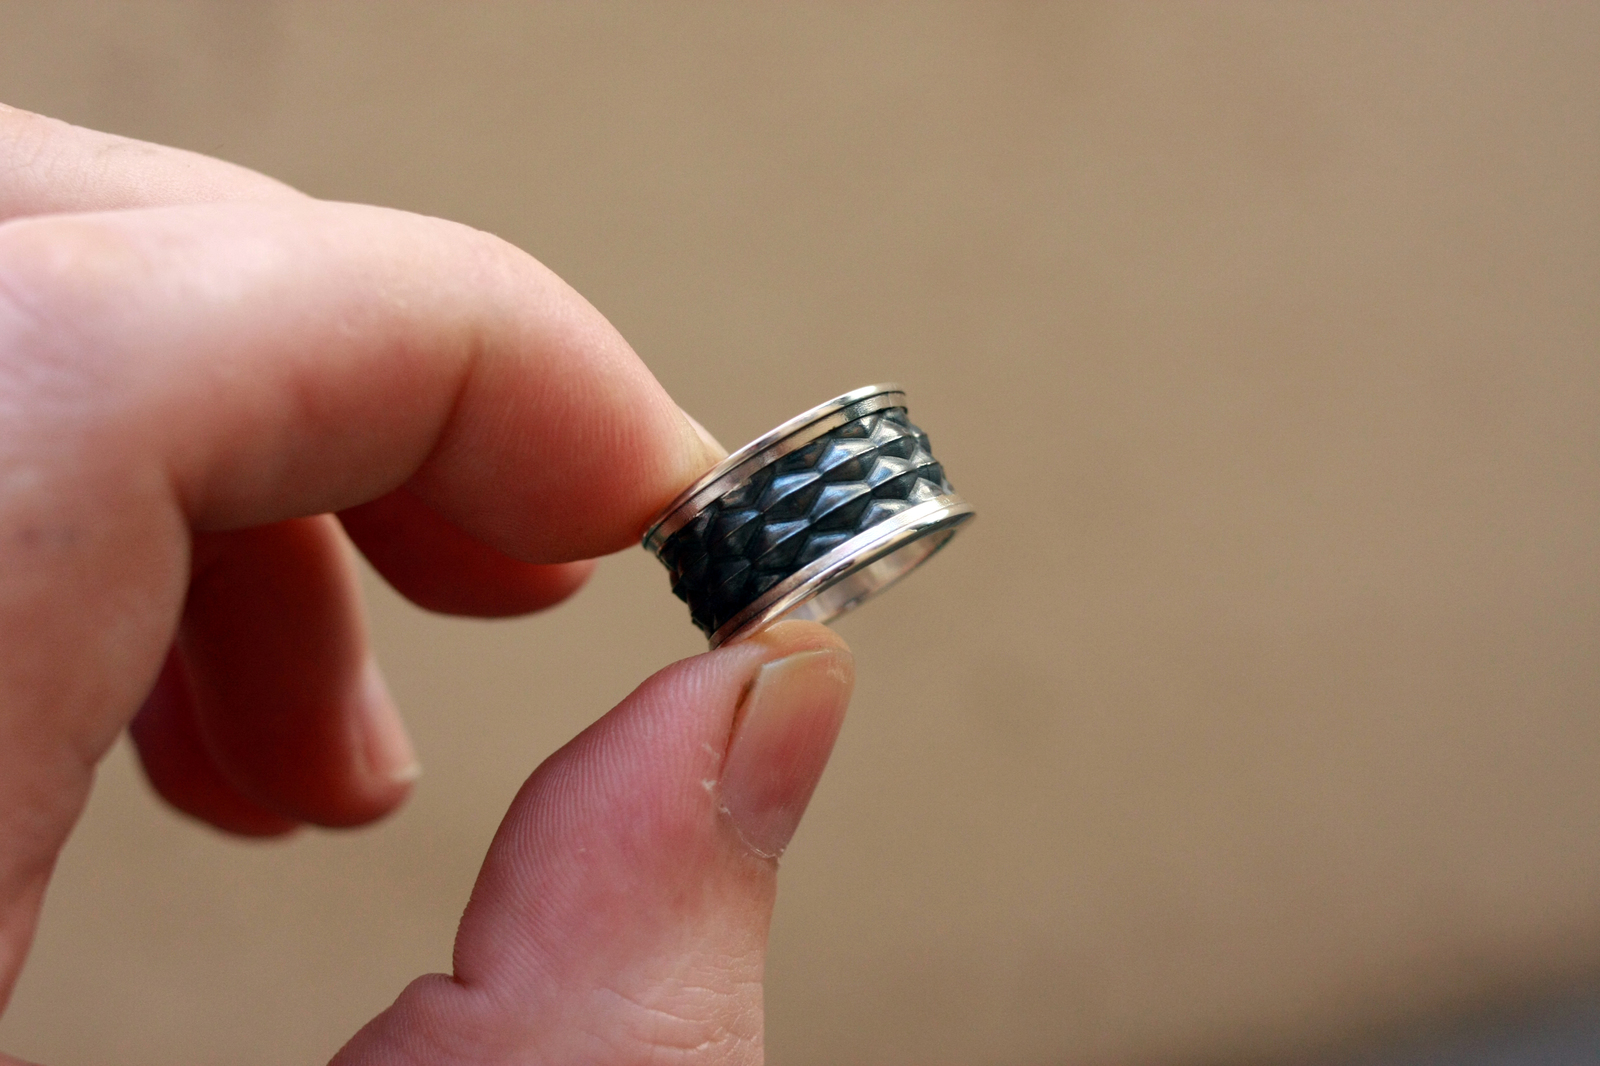 Serpent Scale Ring - My, Snake, Video, Longpost, Ring, Scales, Needlework without process